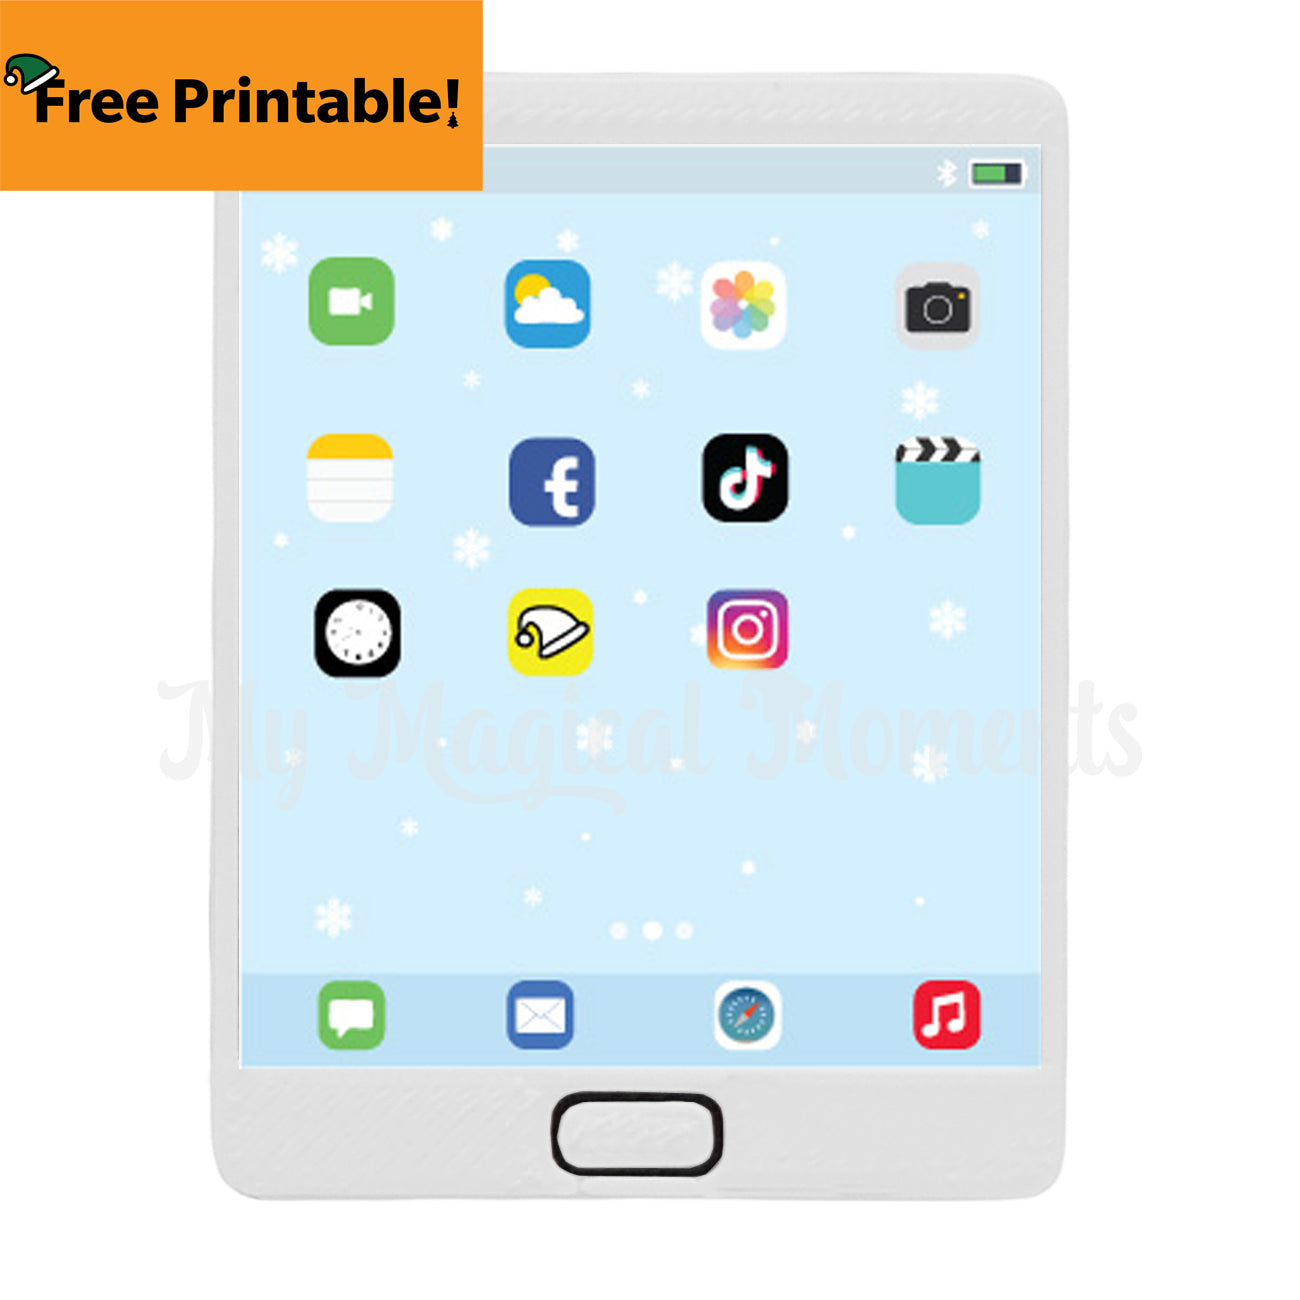 Tablet home page - Free tablet screen printable